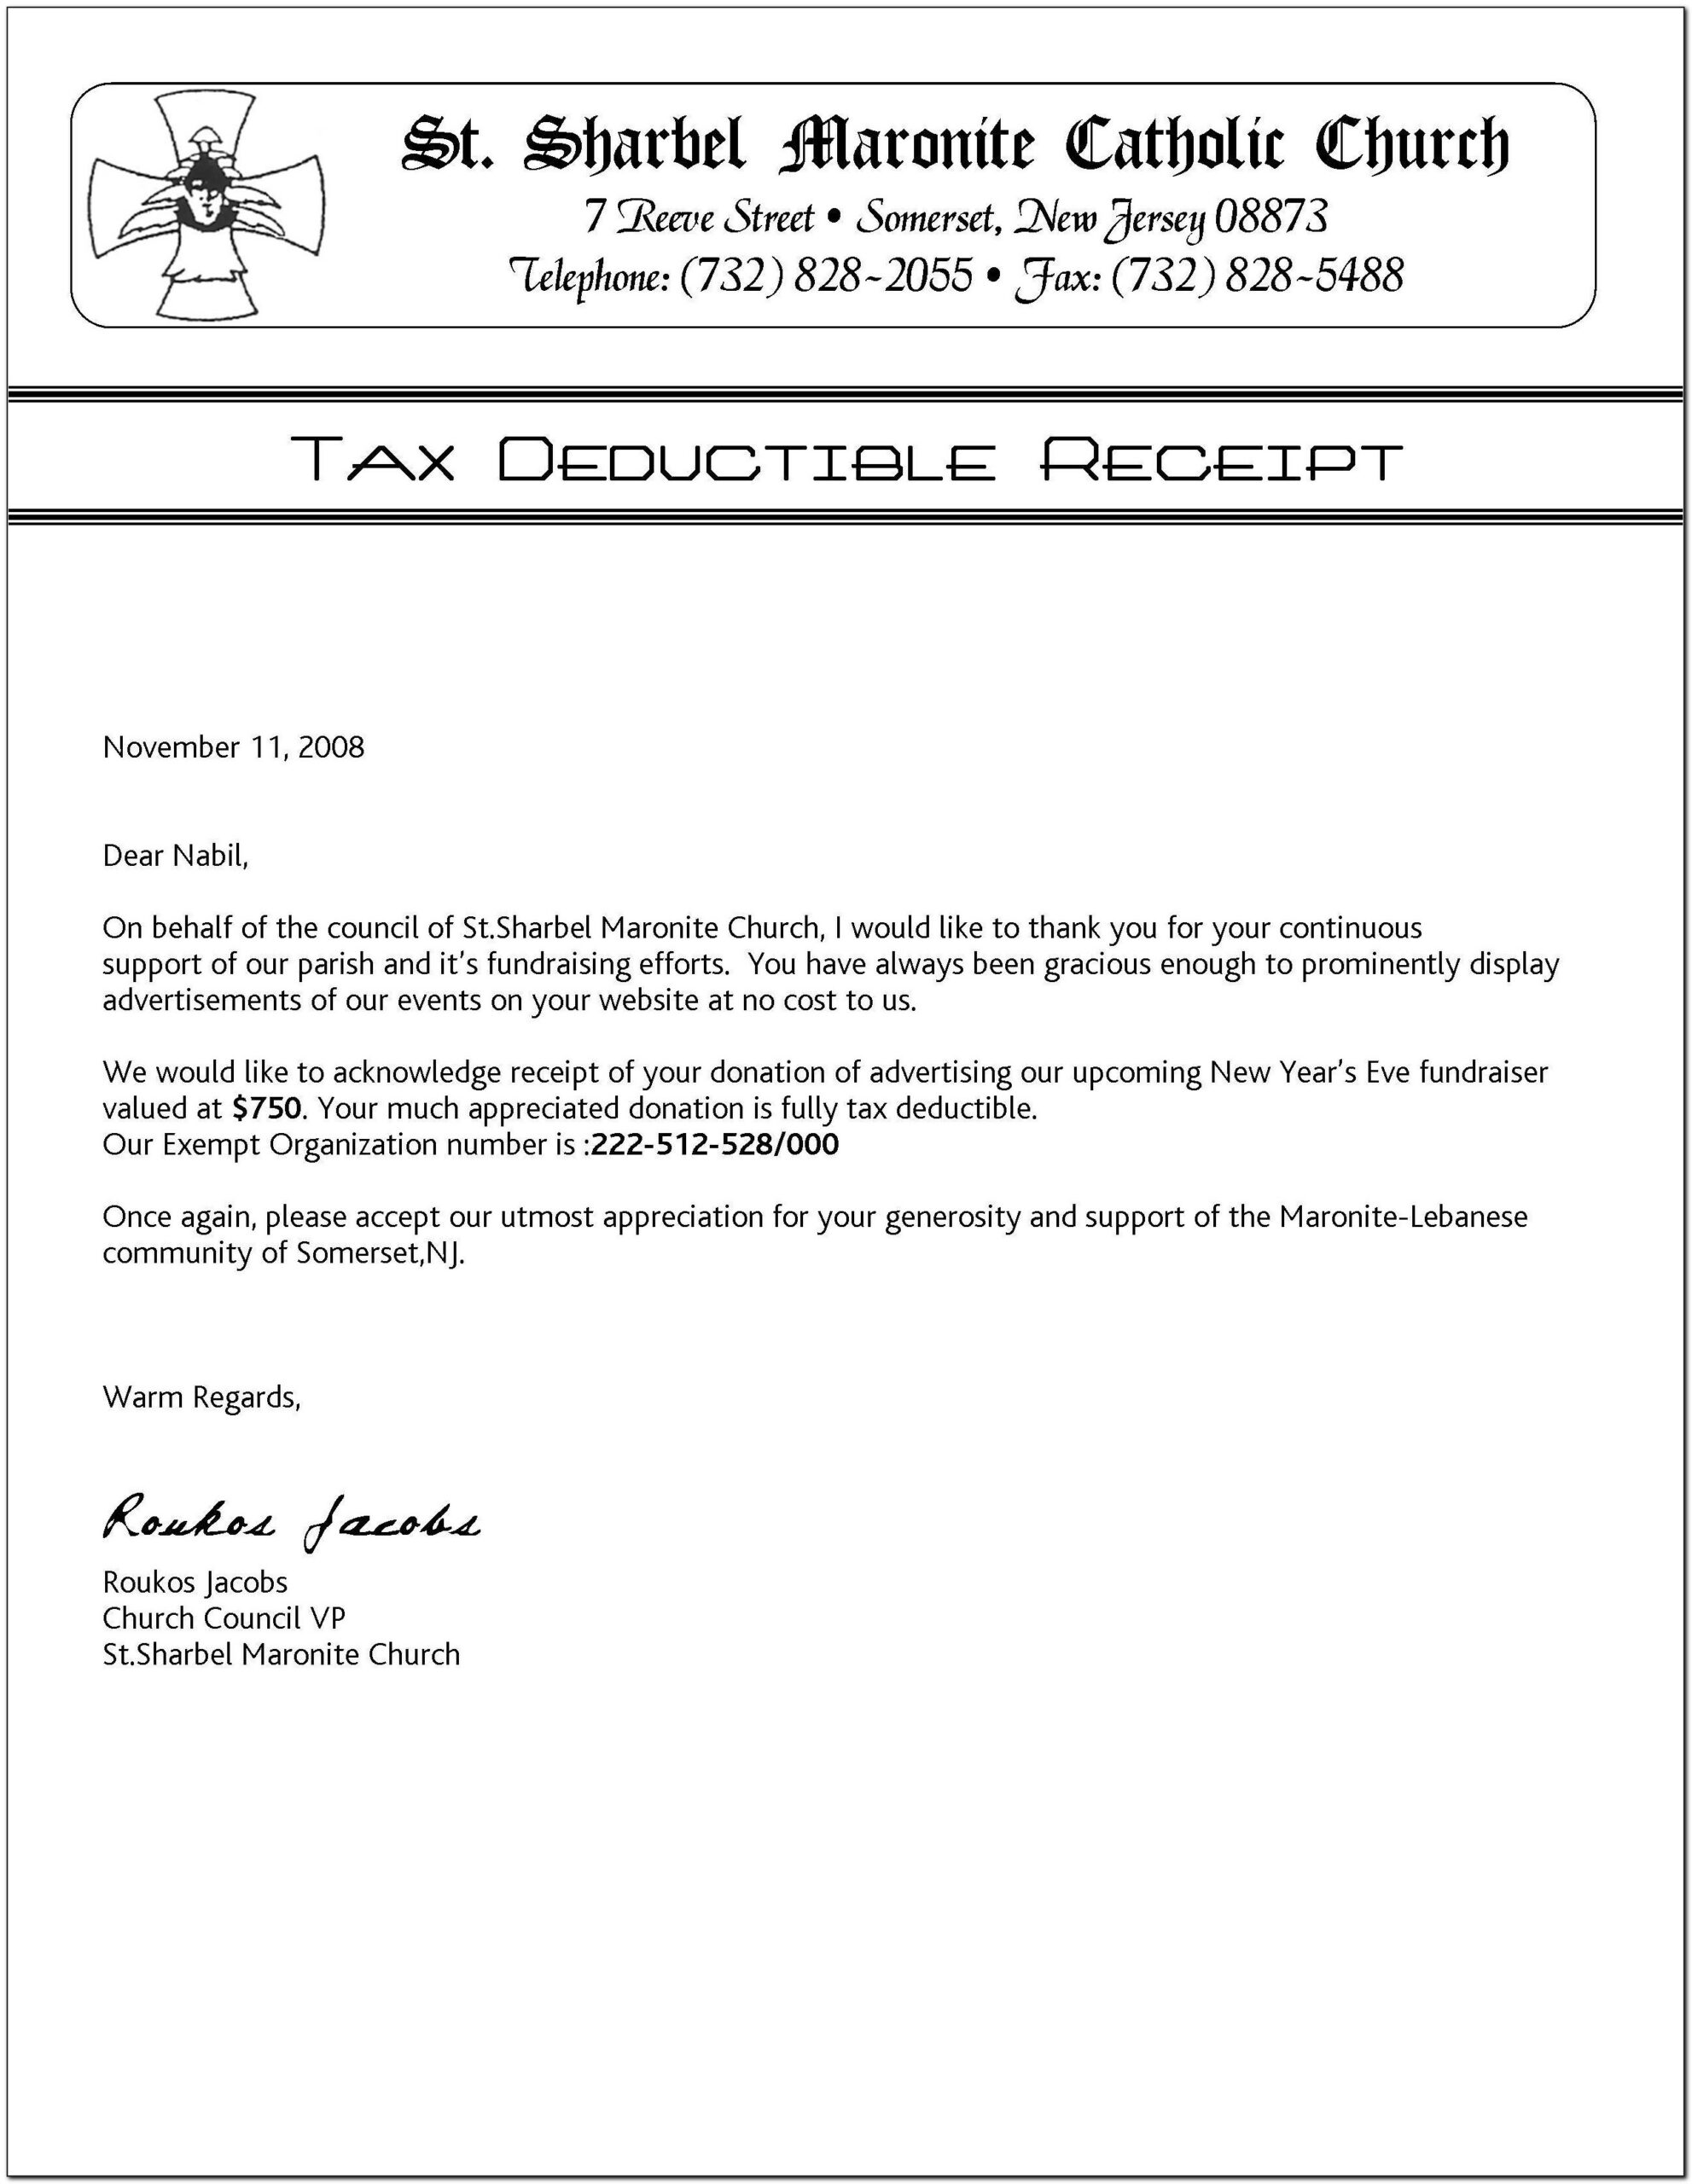 Sample Church Donation Receipt Letter For Tax Purposes